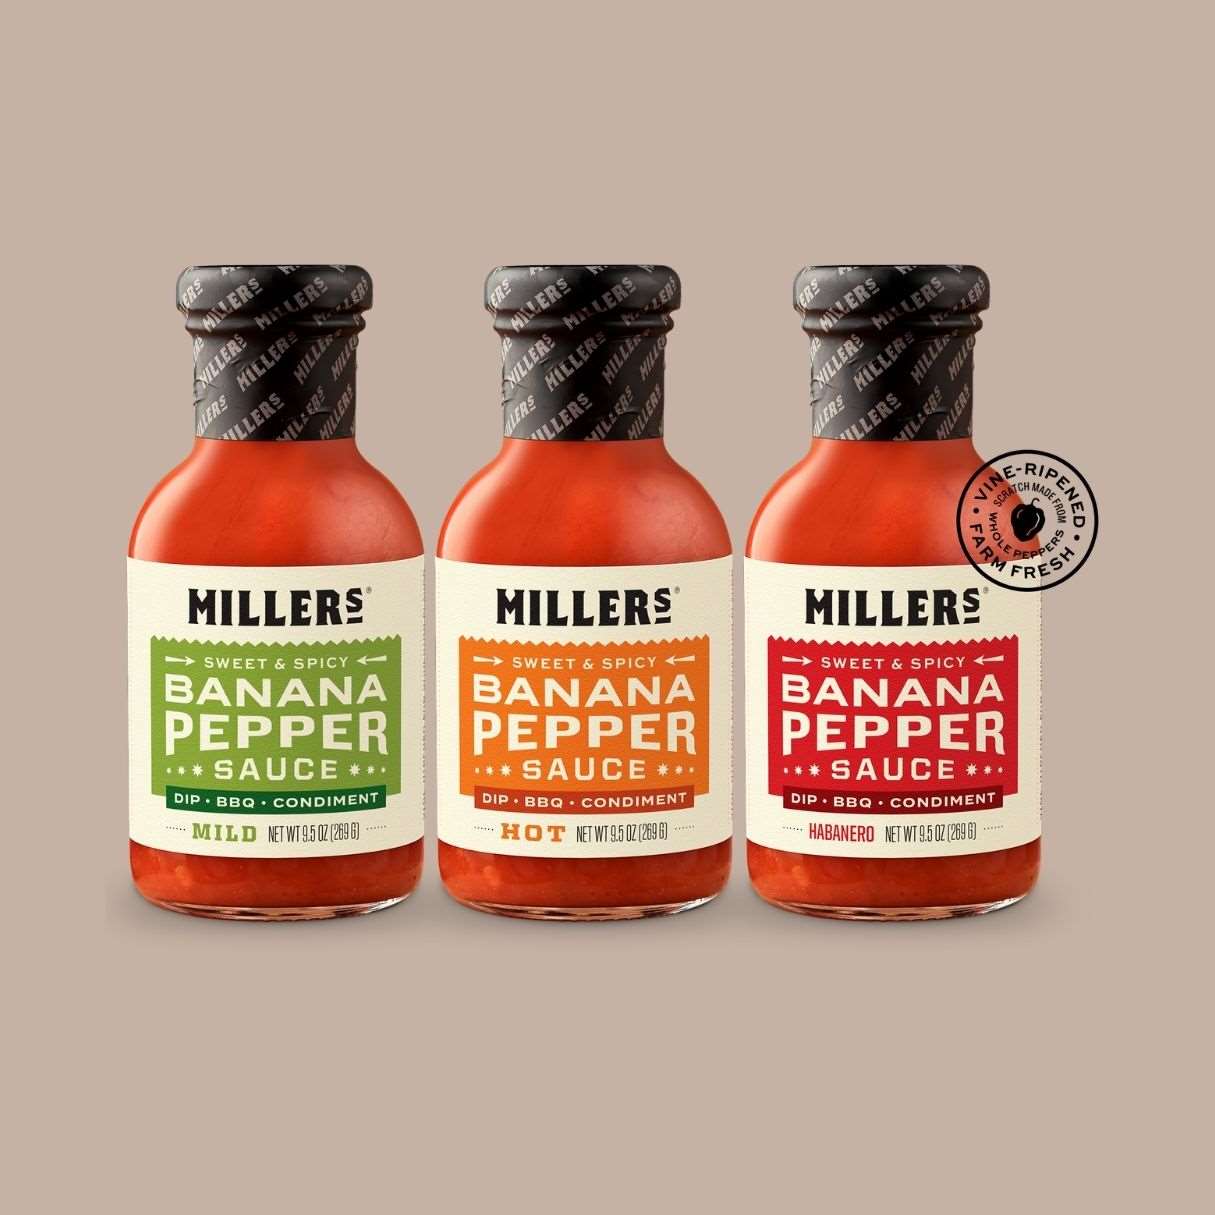 Banana Pepper Sauce - Miller's - Box Builder Item - KINSHIP GIFT - Baking, Cooking, housewarming, LDT:GW:RESTRICT, Men, Miller's - Pittsburgh - gift - boxes - gift - baskets - corporate - gifts - holiday - gifts